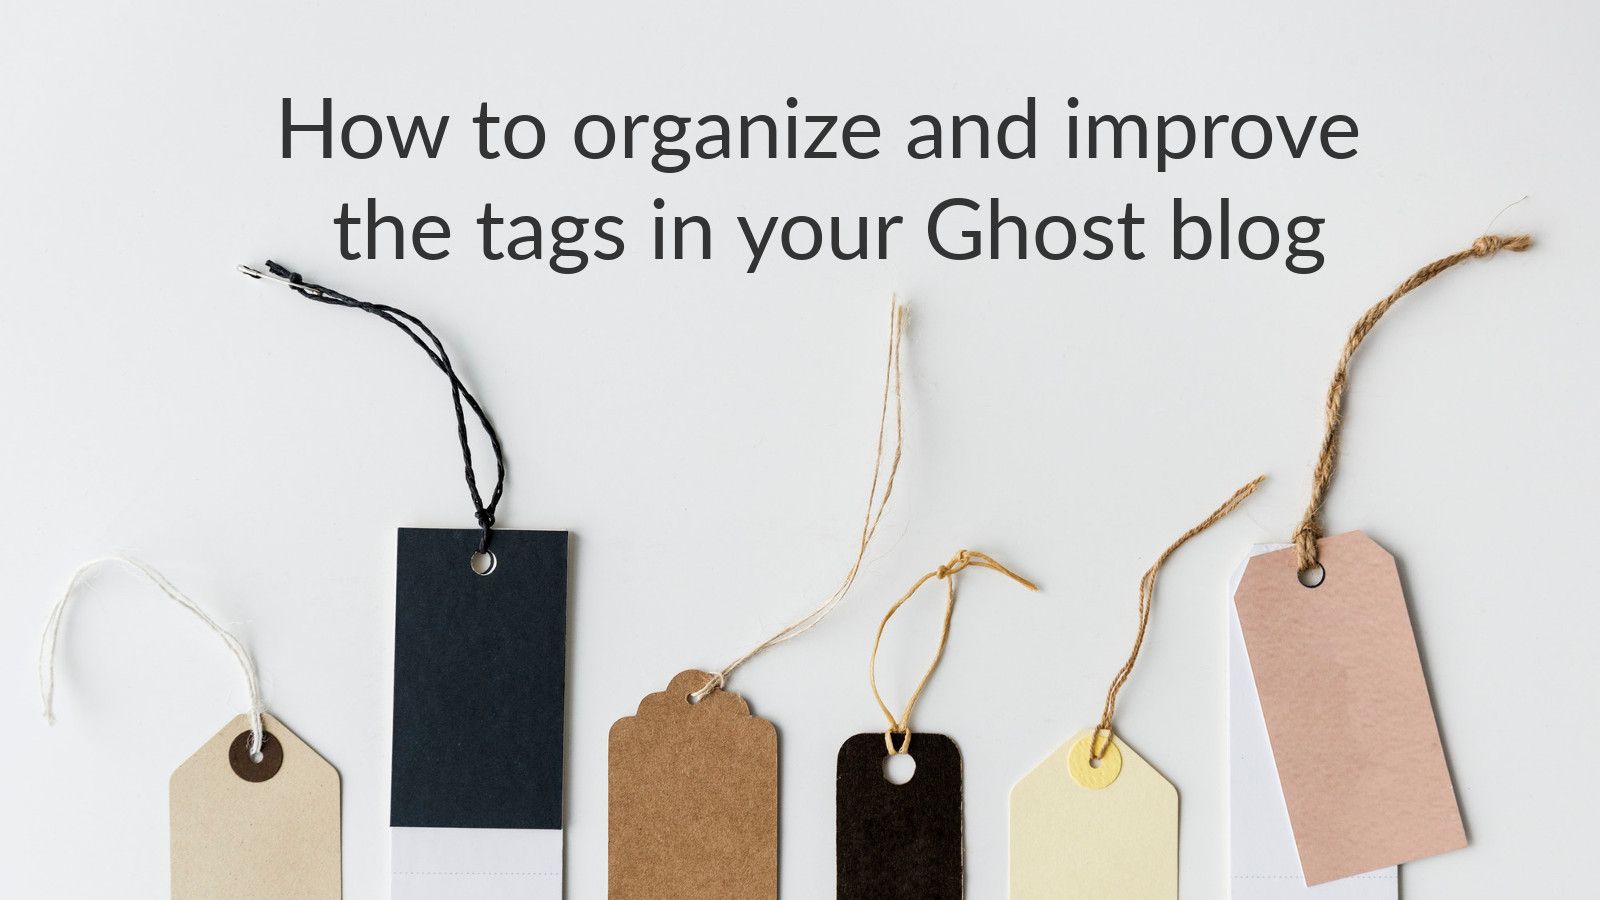 How to organize and improve the tags in your Ghost blog 🏷